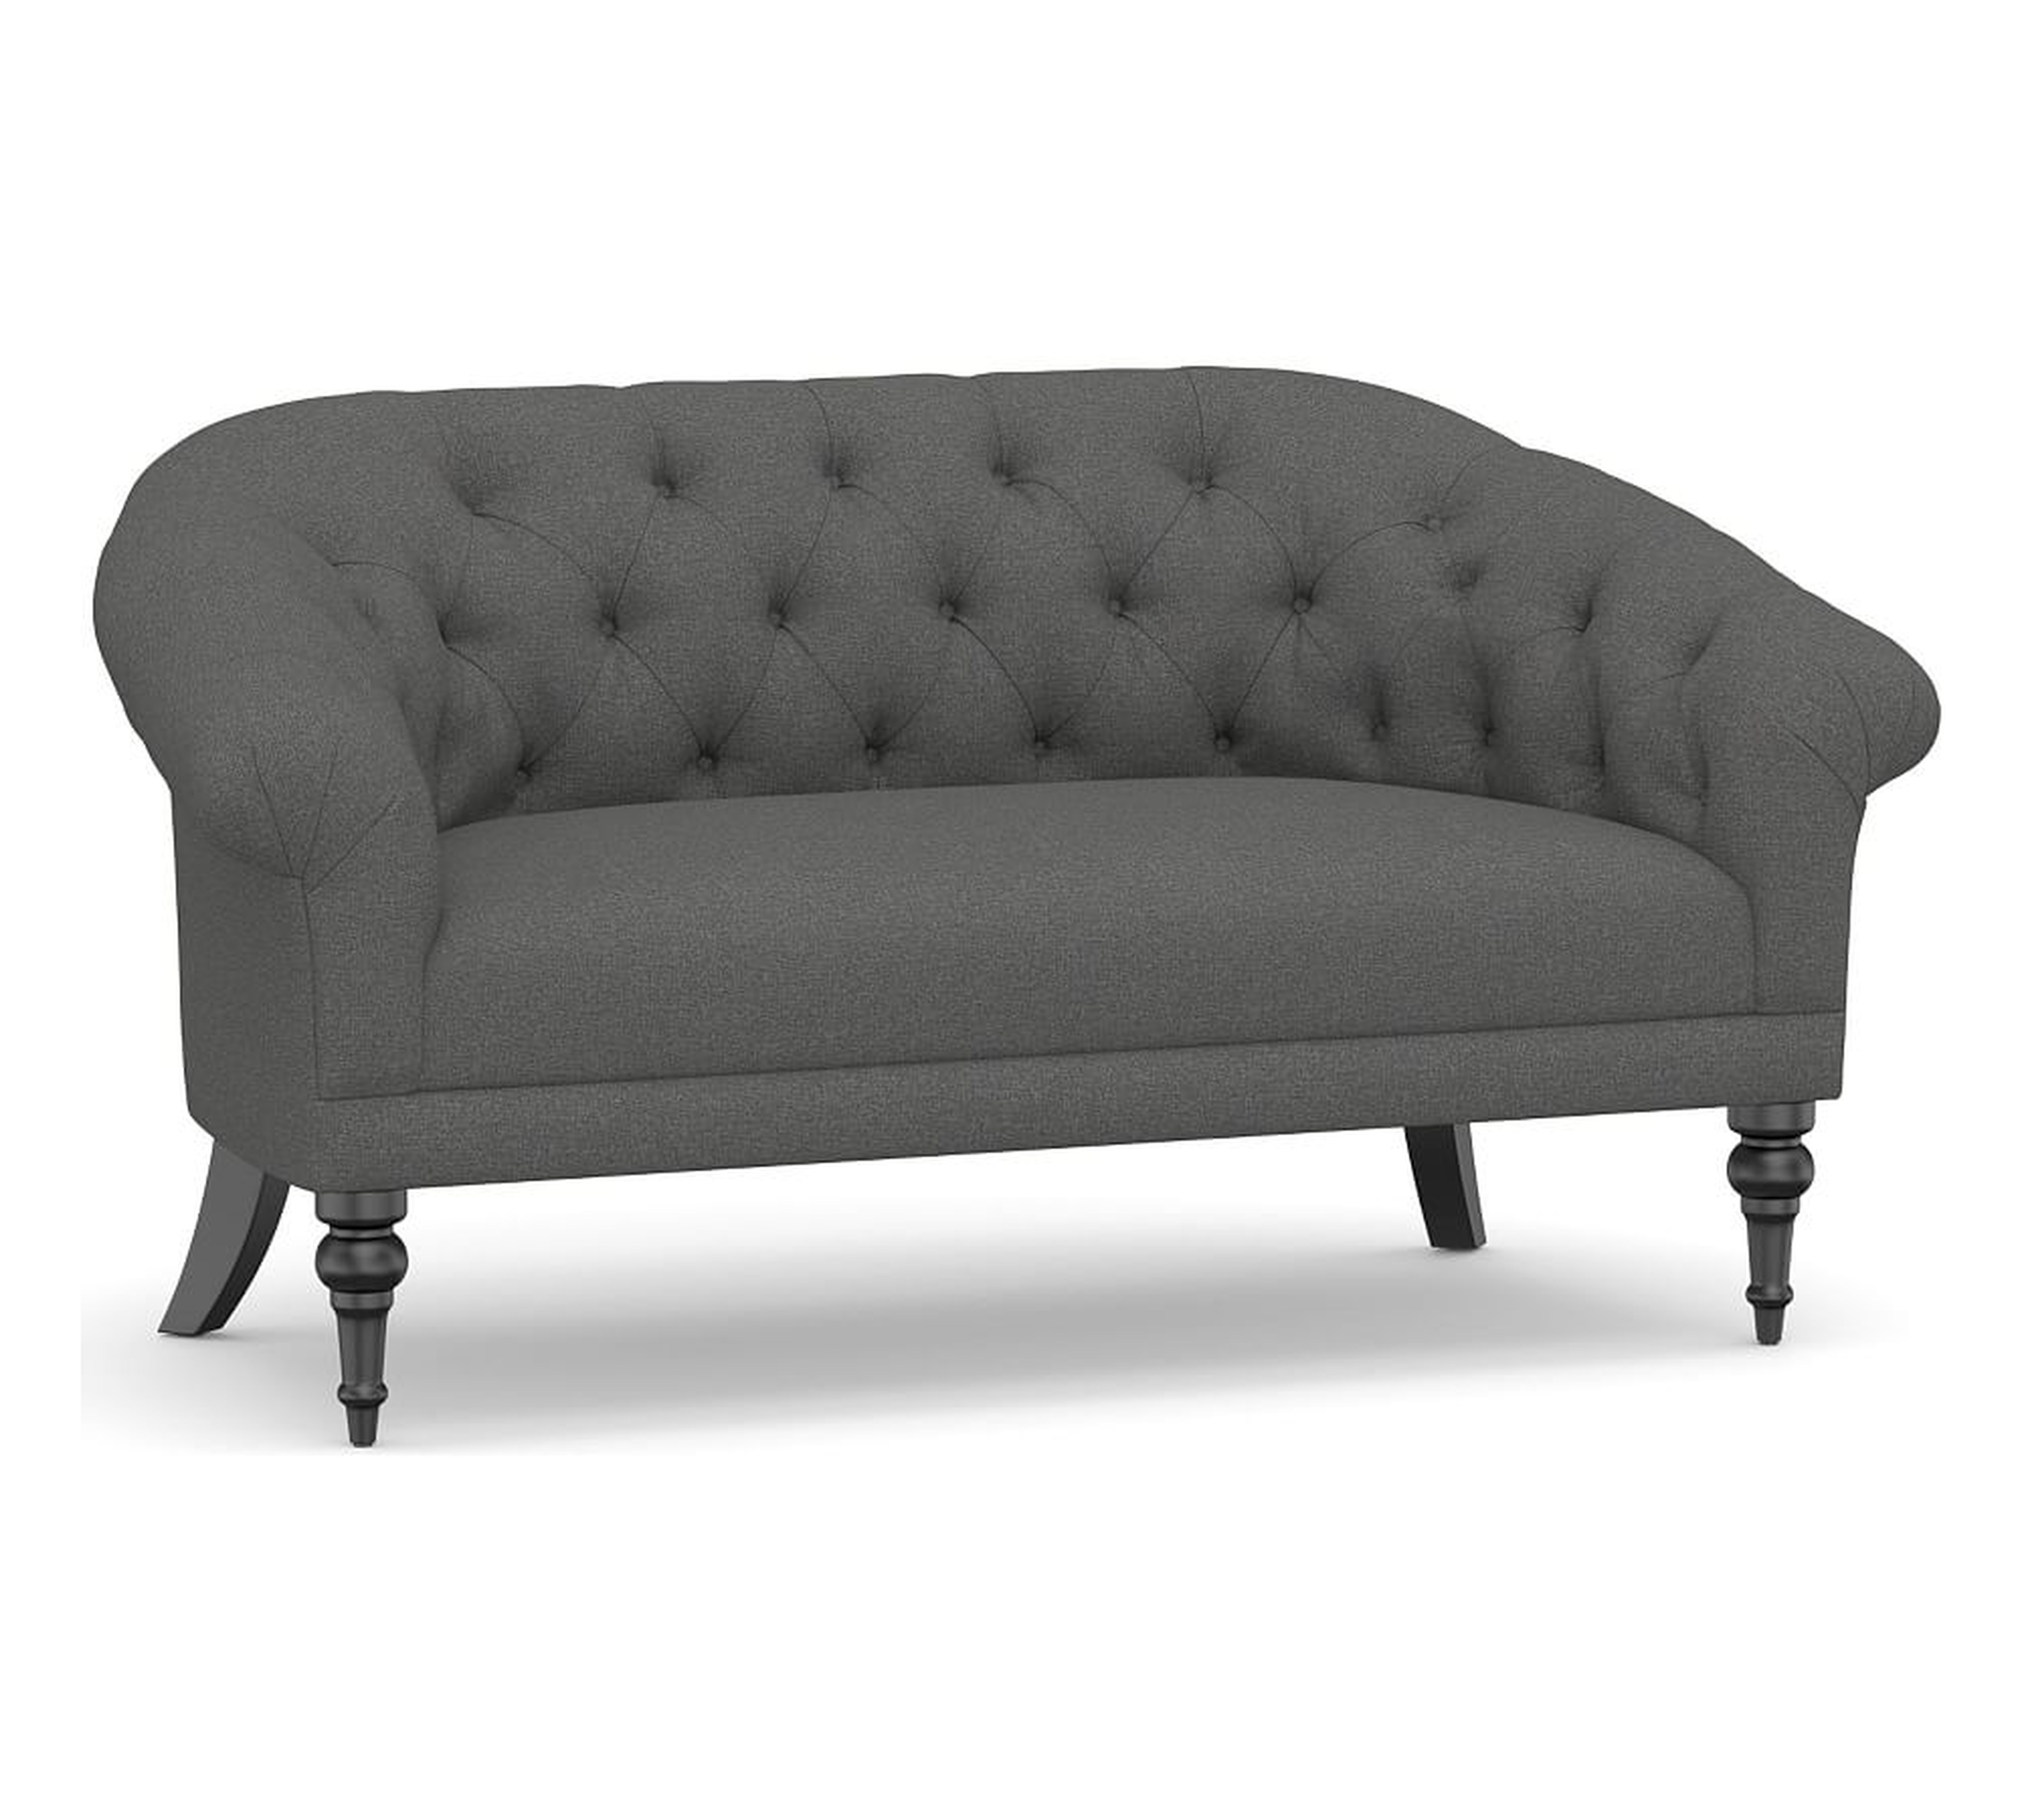 Adeline Upholstered Mini Sofa 59", Polyester Wrapped Cushions, Park Weave Charcoal - Pottery Barn